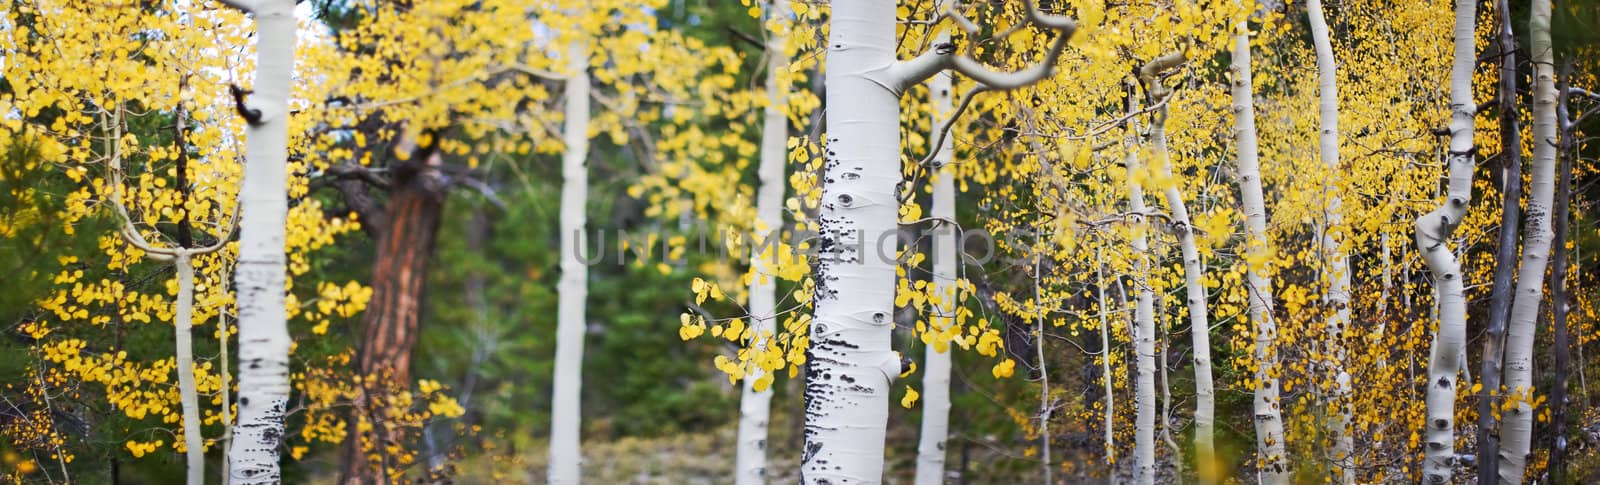 panoramic photo of aspen trees with yellow leaves in the fall outside in the forest 